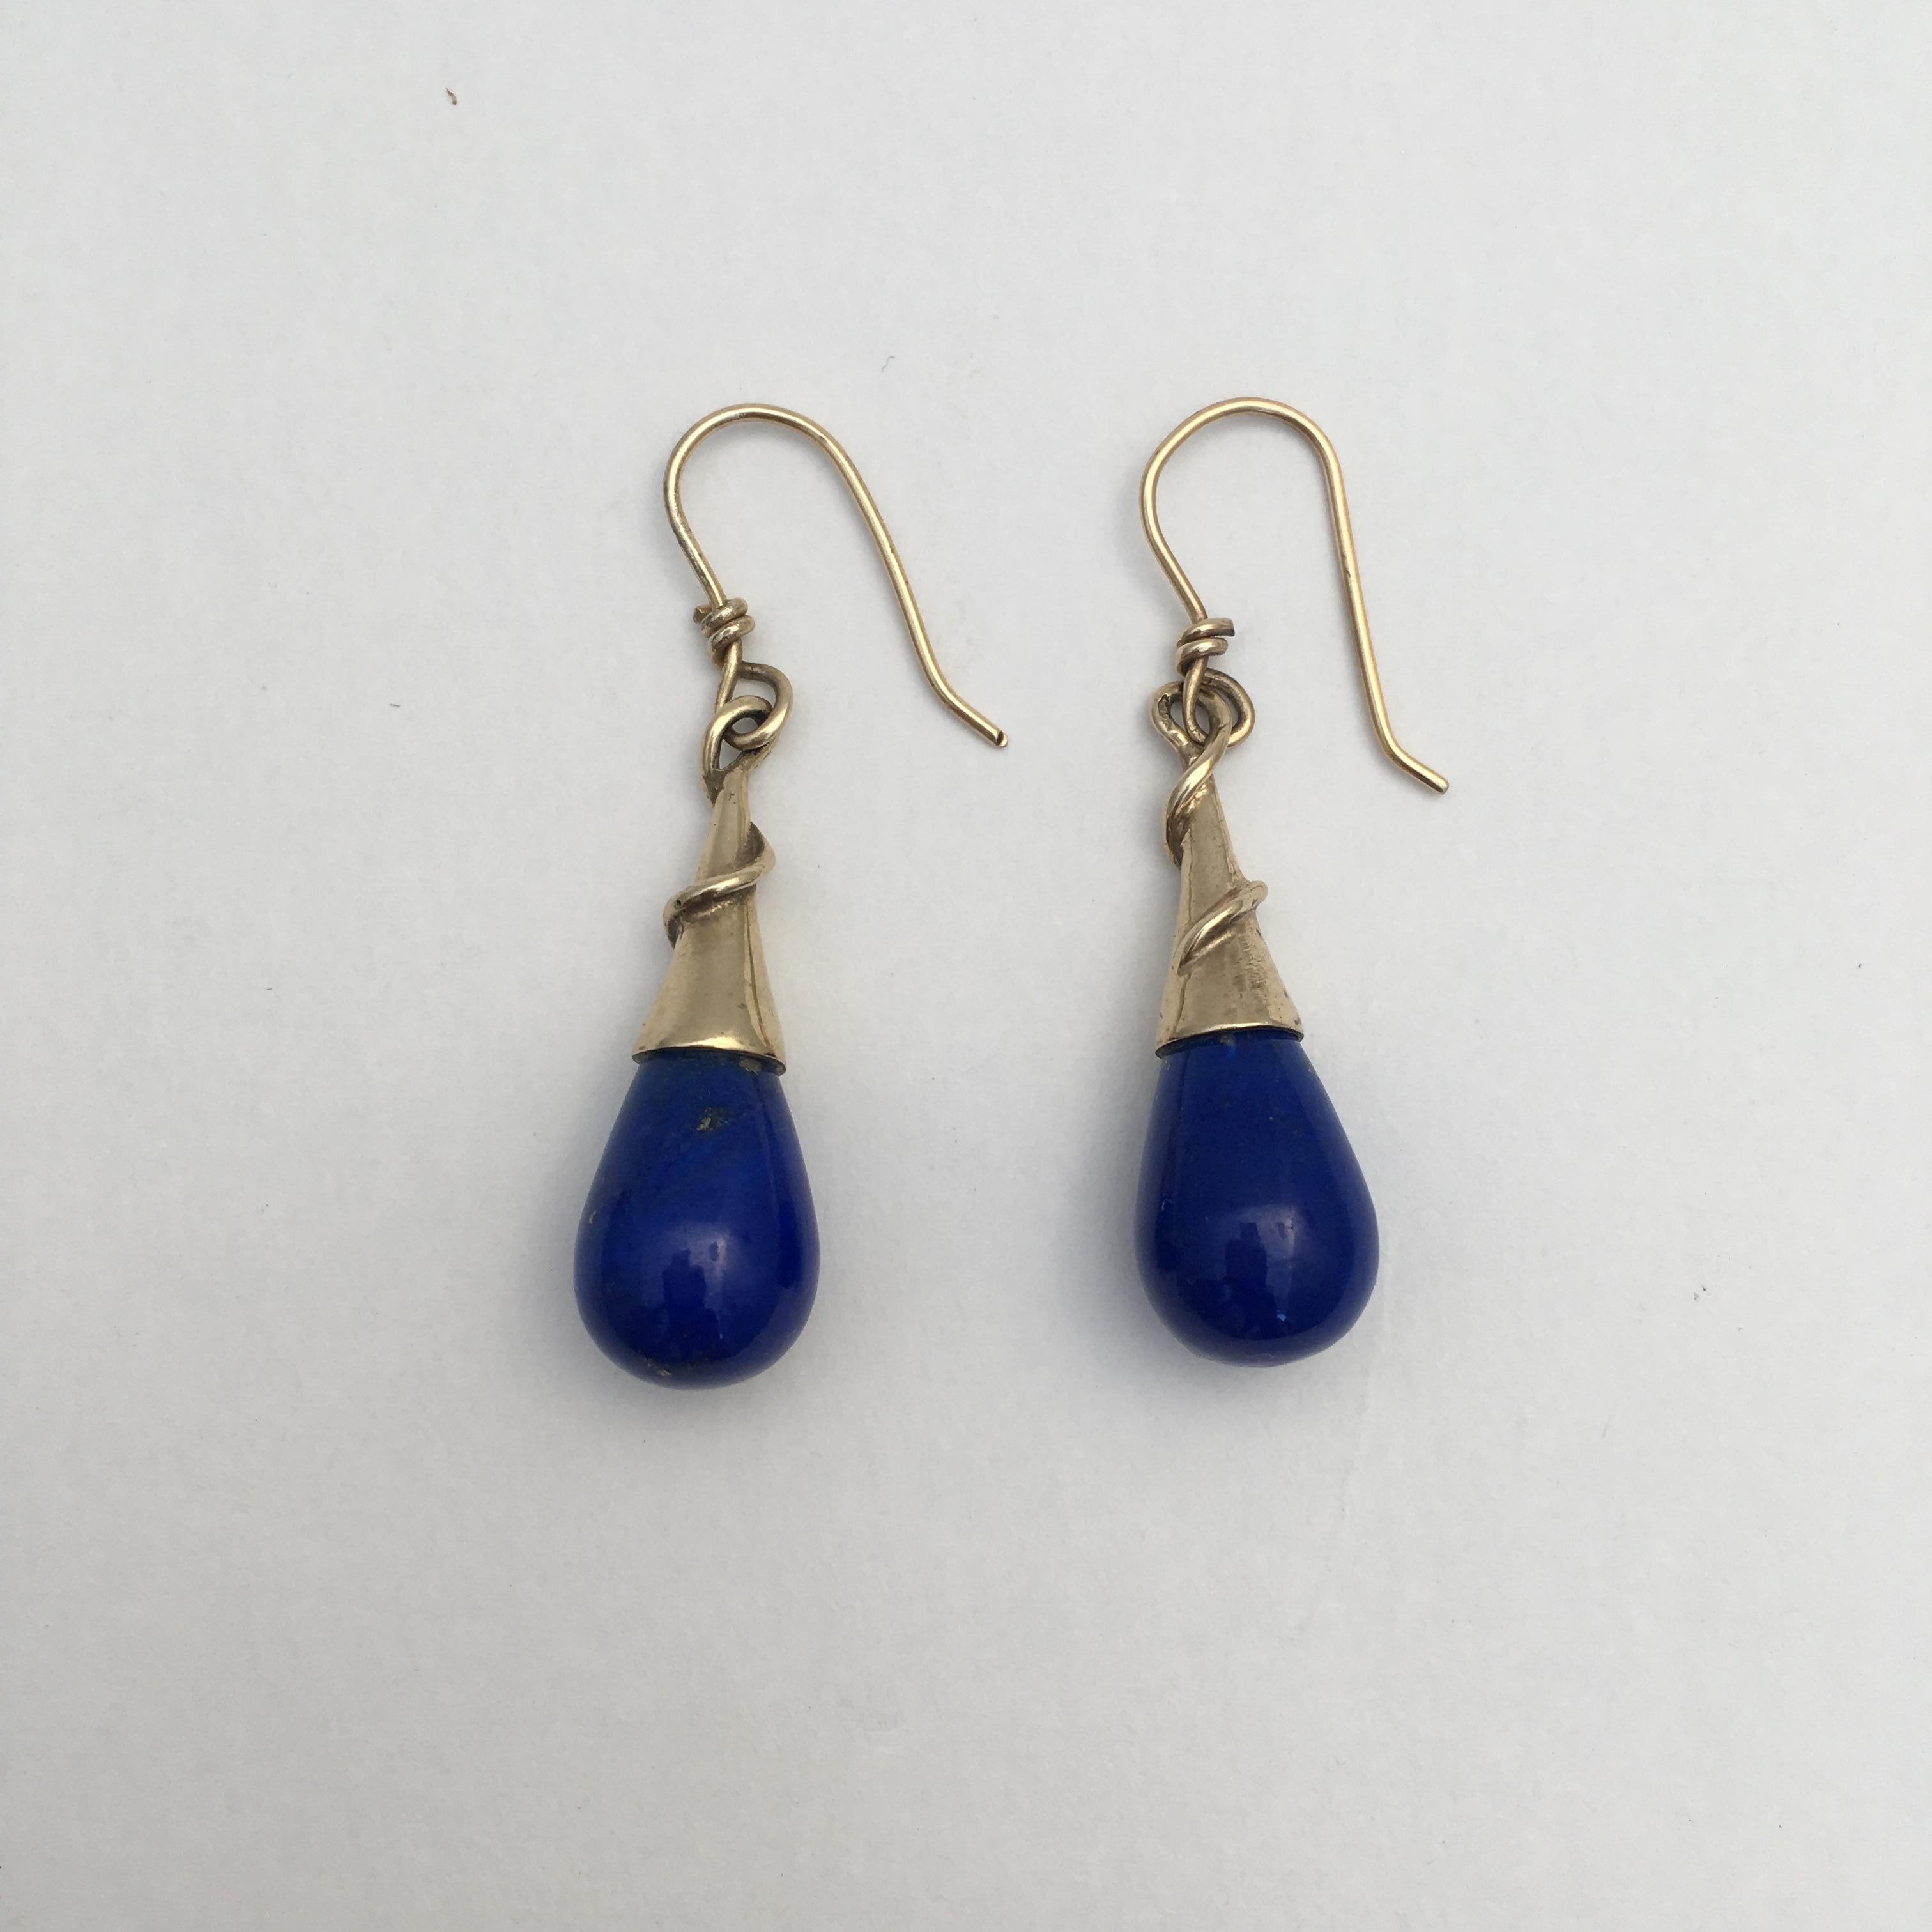 The rich cobalt blue of these stylish earrings catches the eye beautifully, the lapis lazuli and yellow gold working perfectly together. The clever design creates a spiral effect around the gold mounts, while the delicious lapis stones appear like